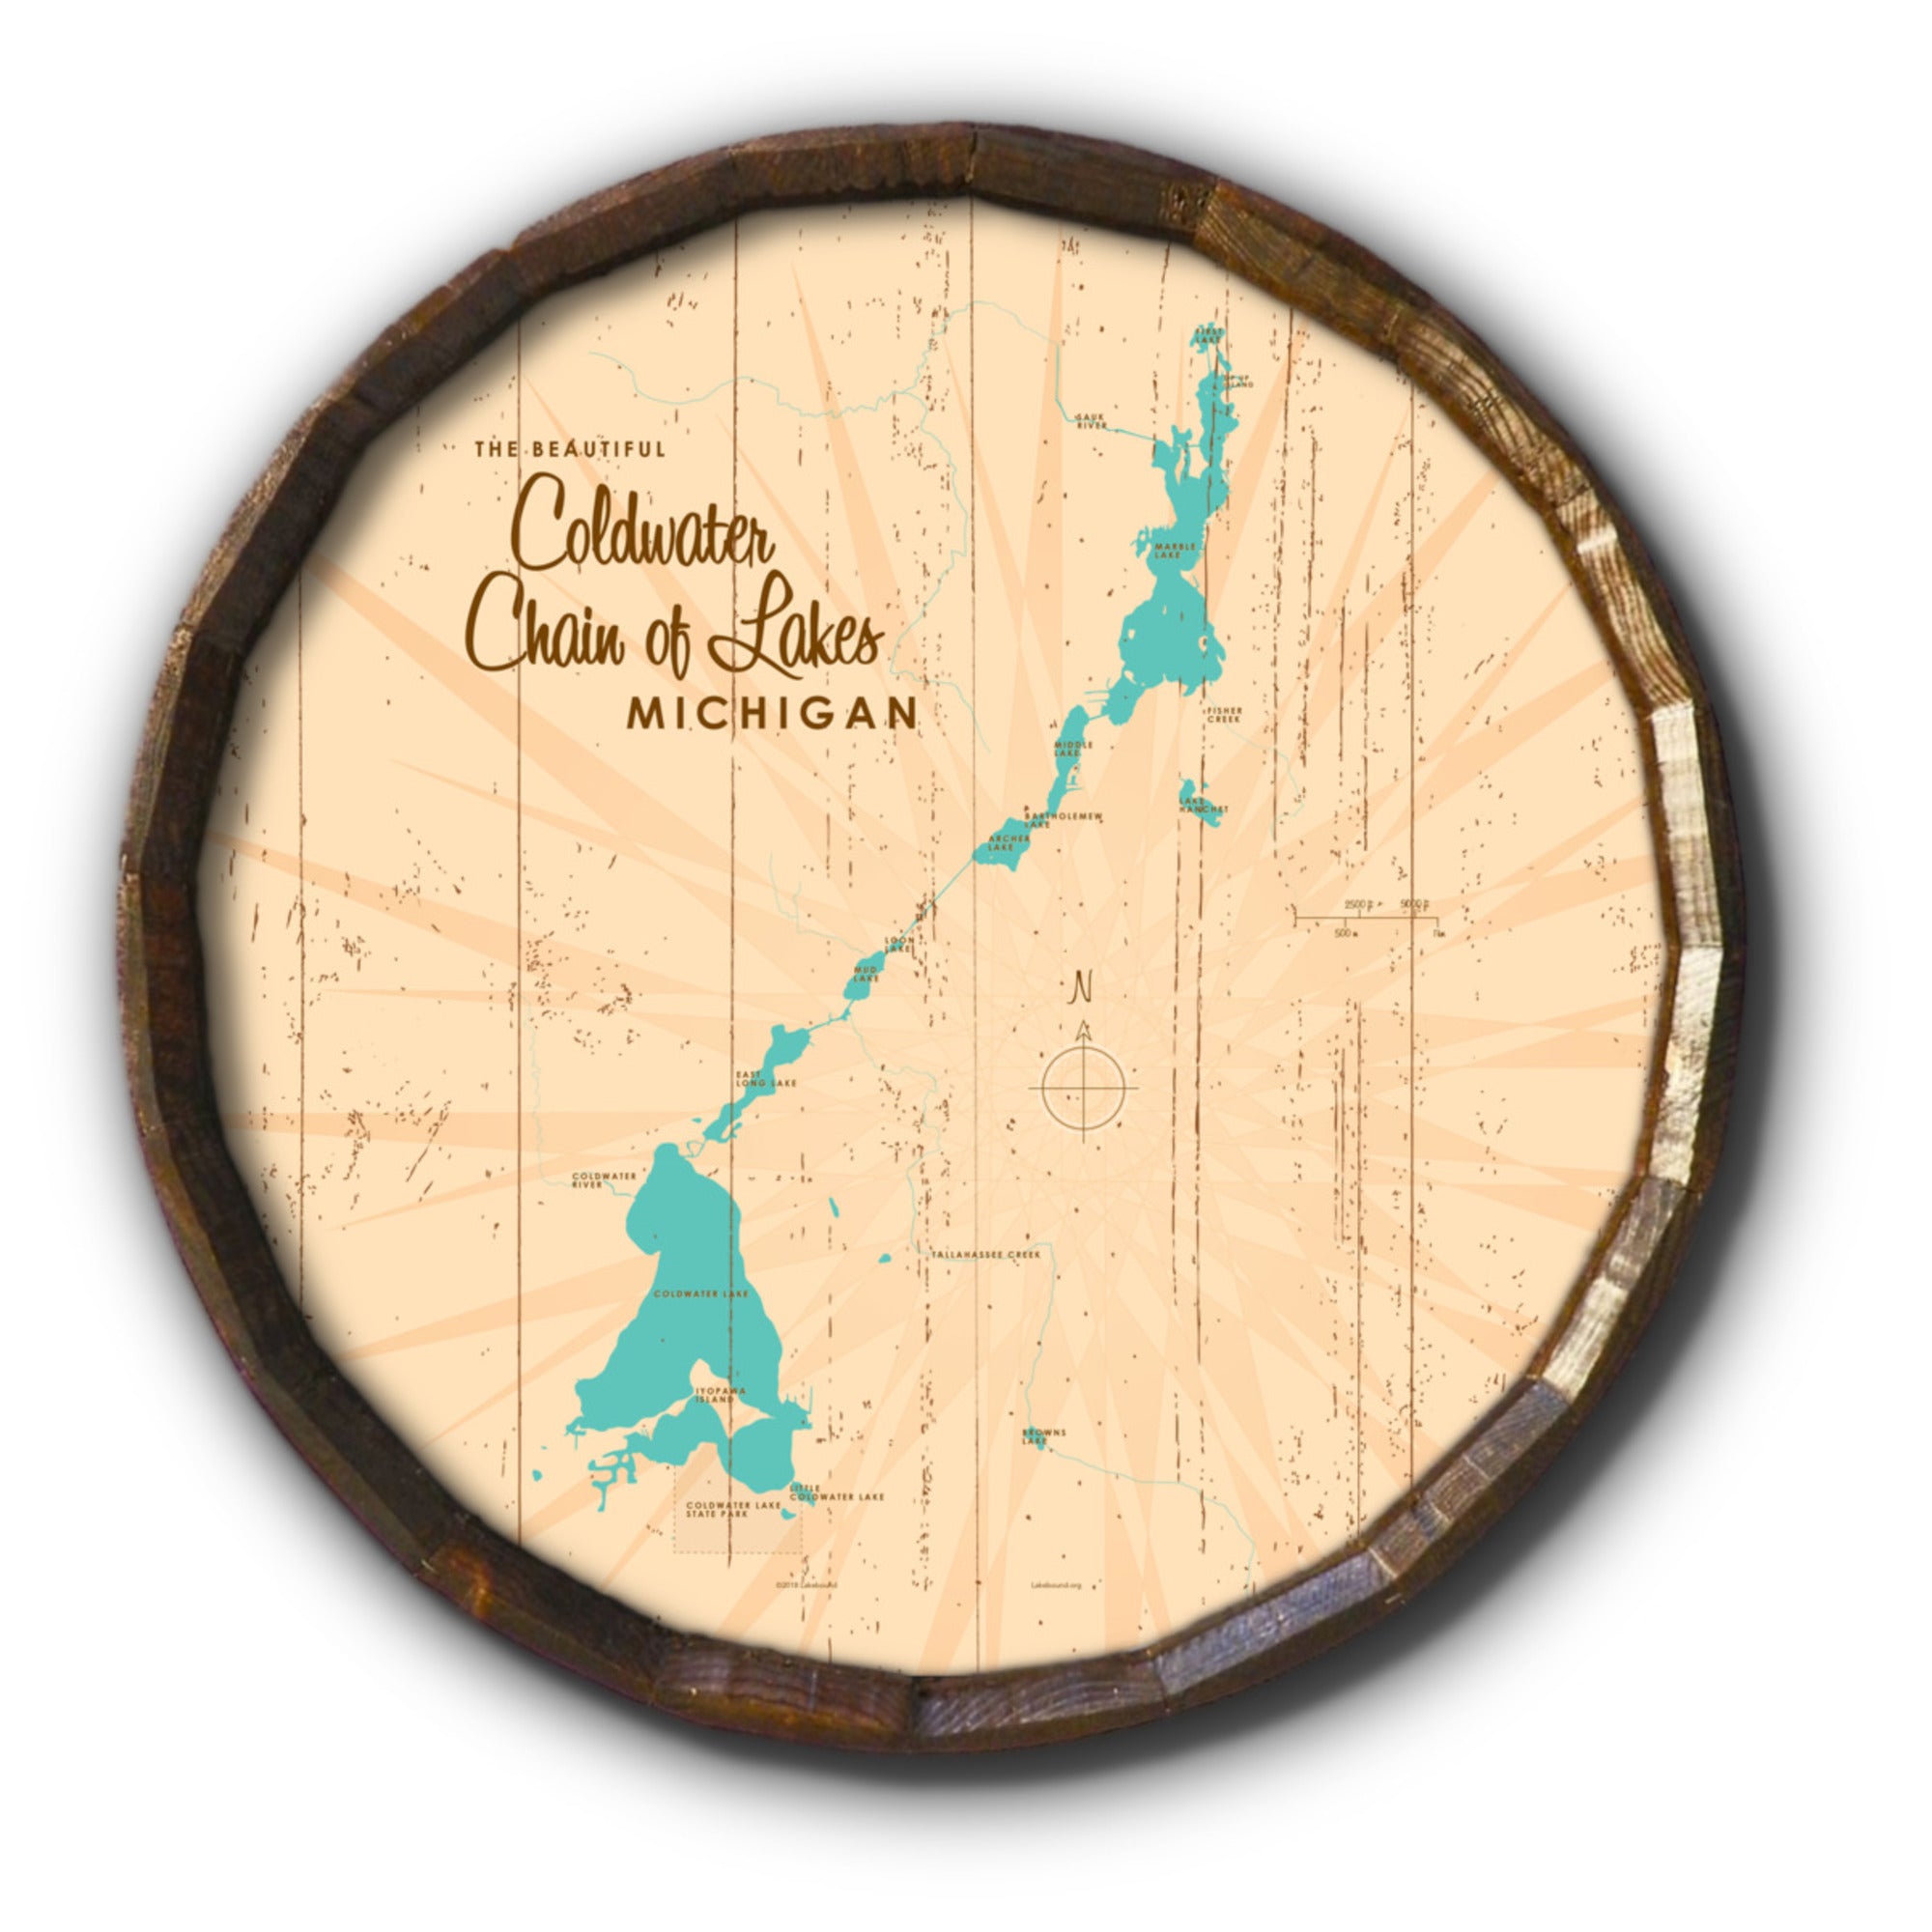 Coldwater Chain of Lakes Michigan, Rustic Barrel End Map Art